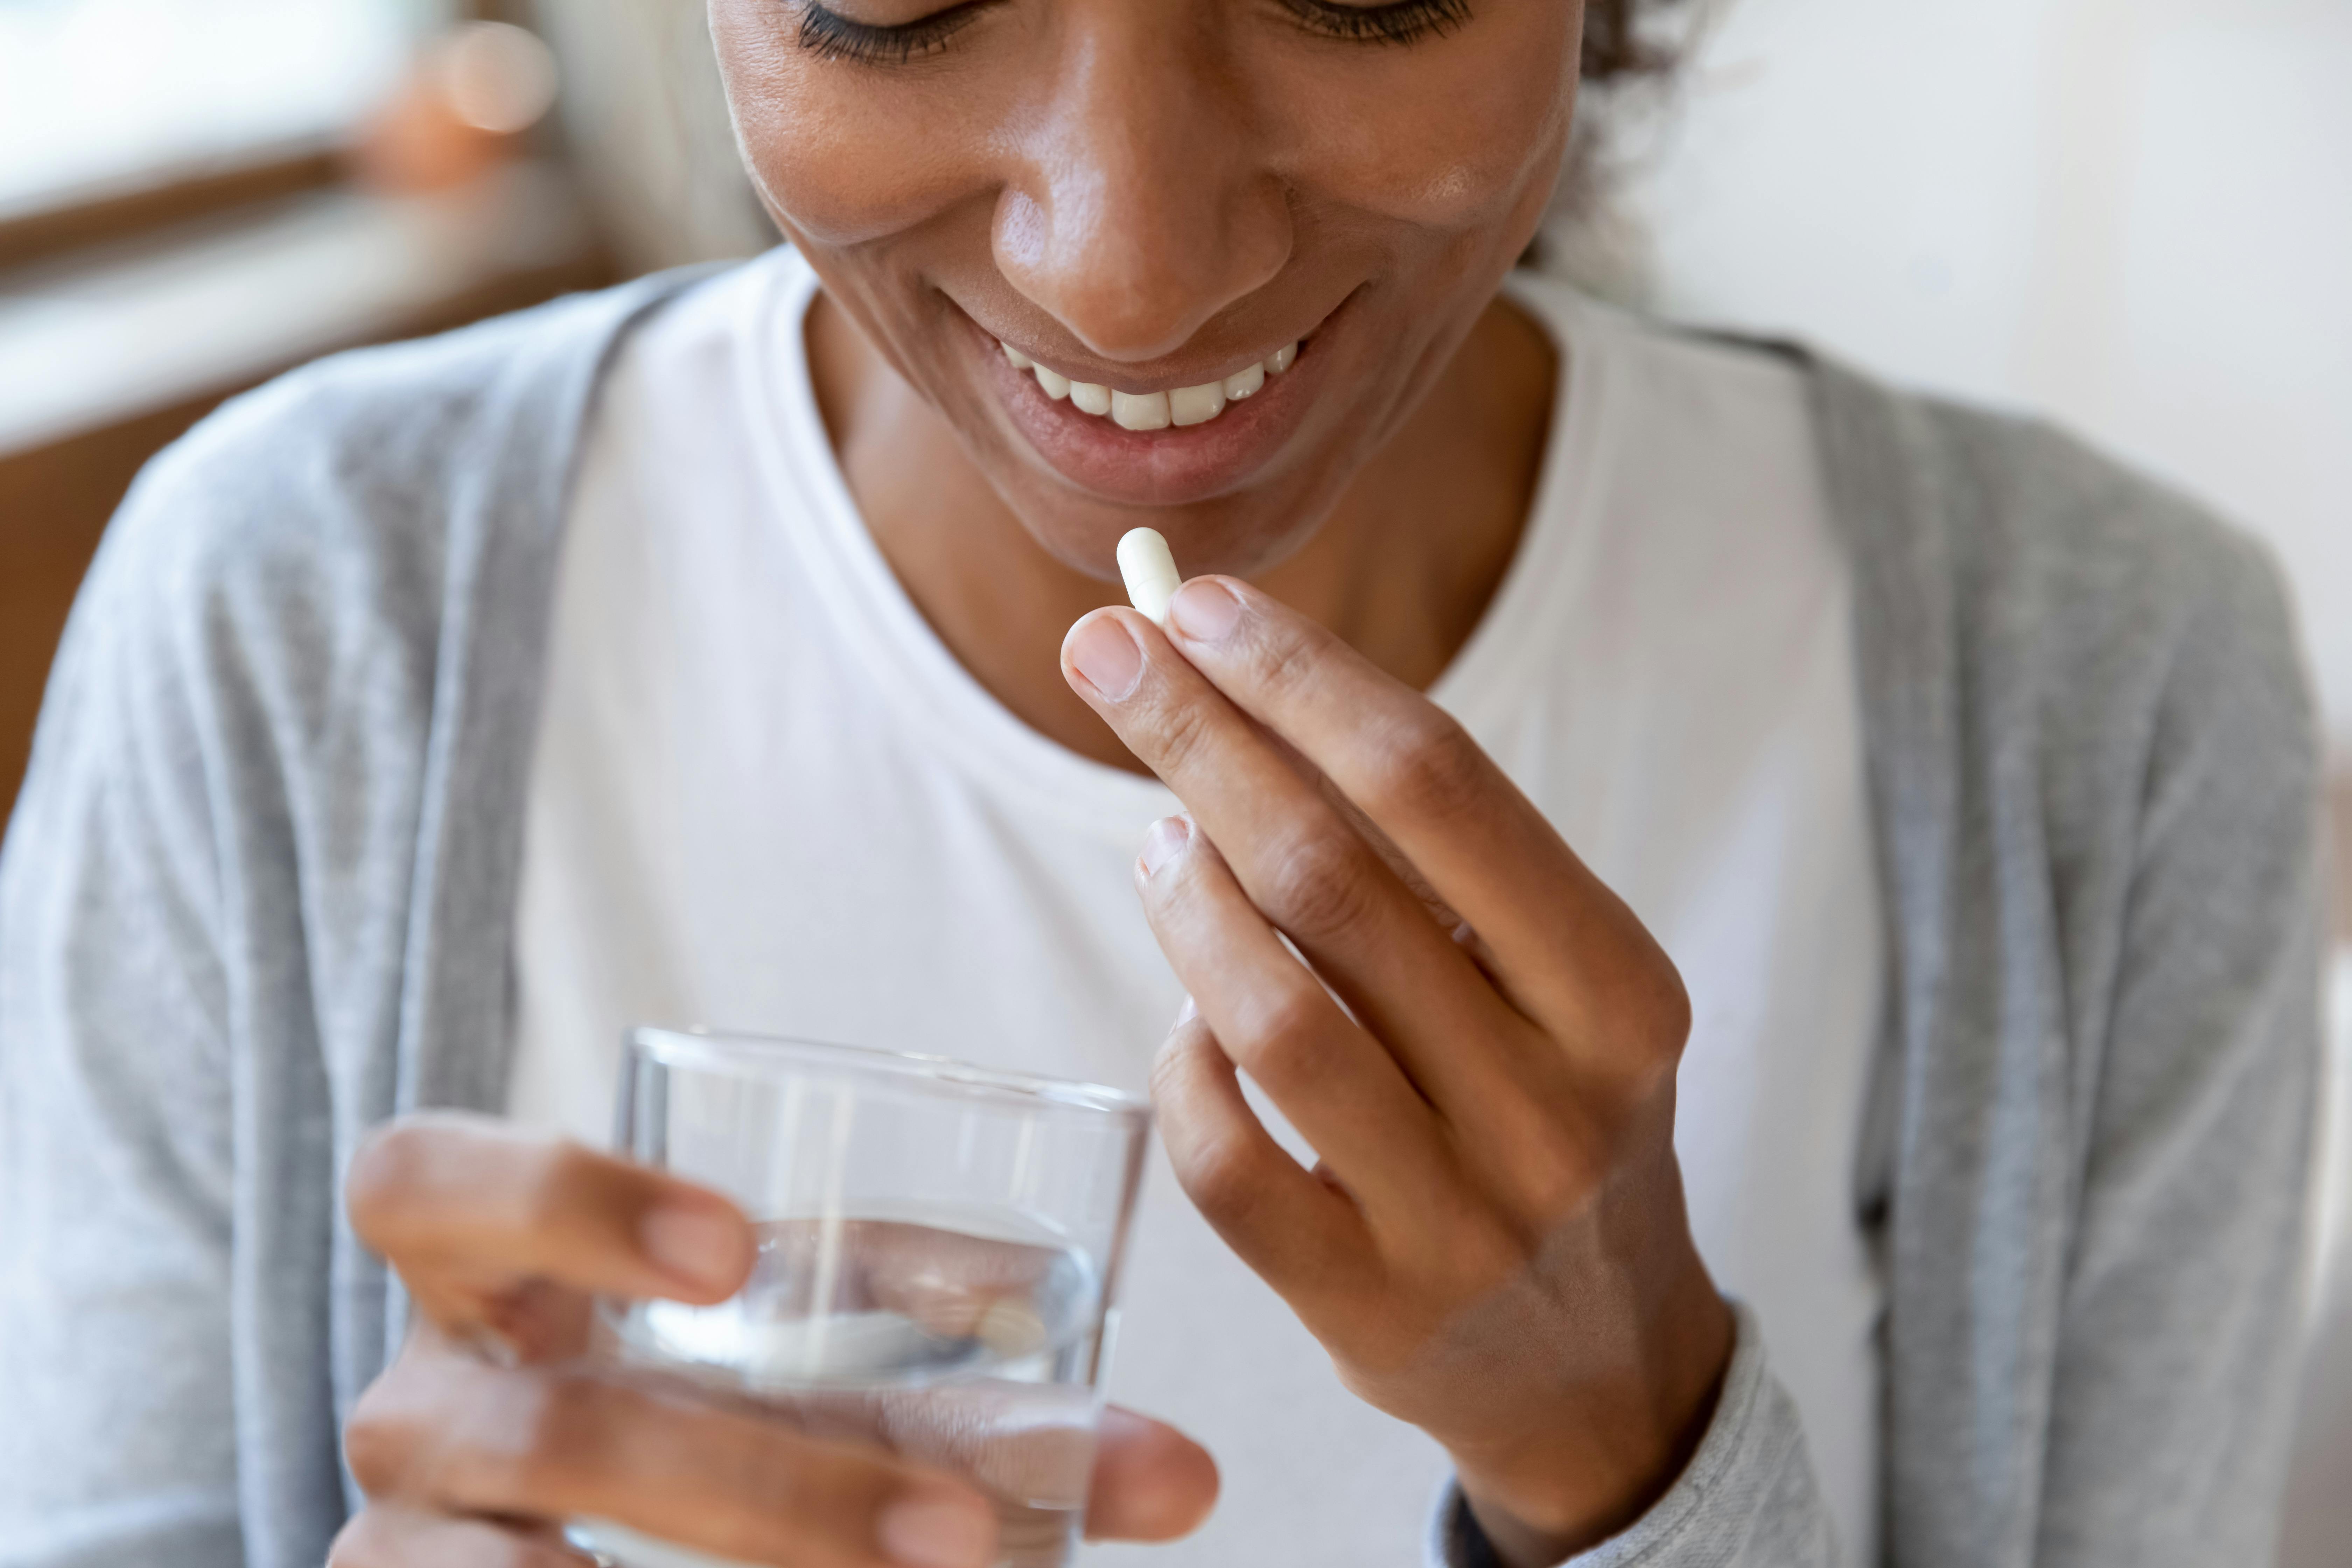 Smiling woman taking a pill